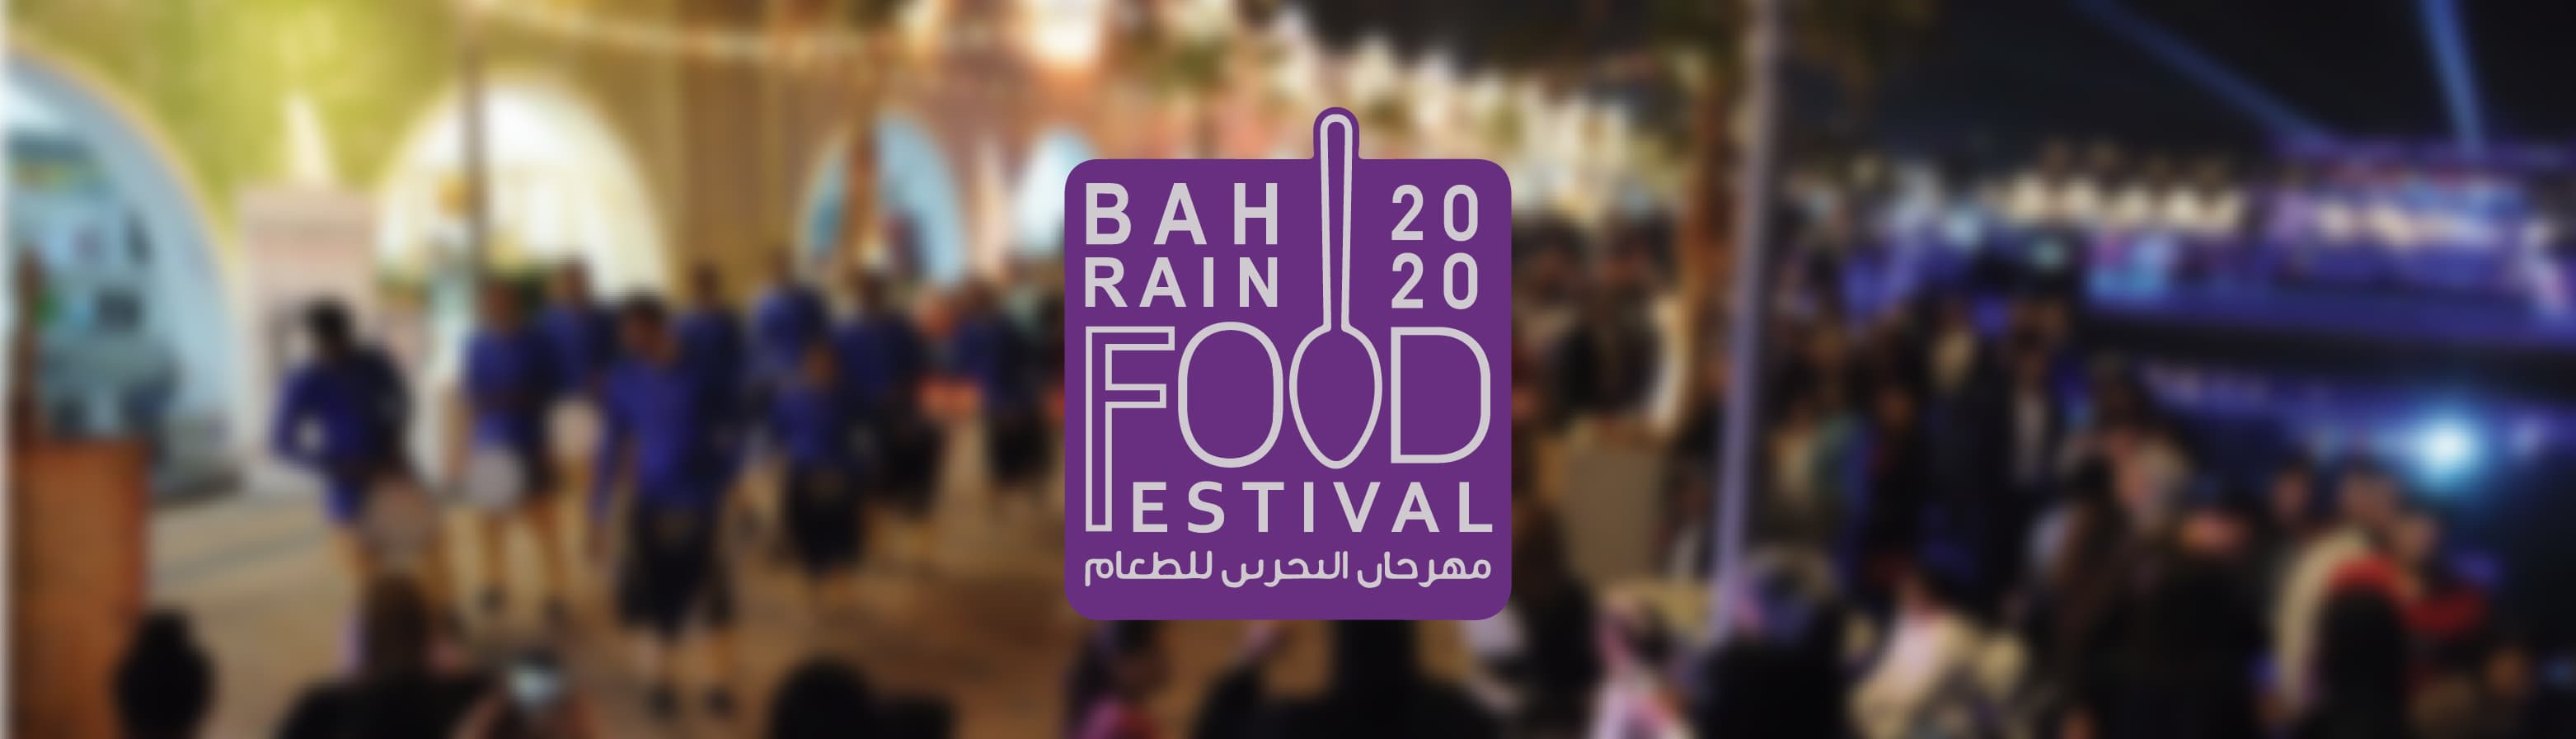 (BTEA) launched the 5th Bahrain Food Festival 